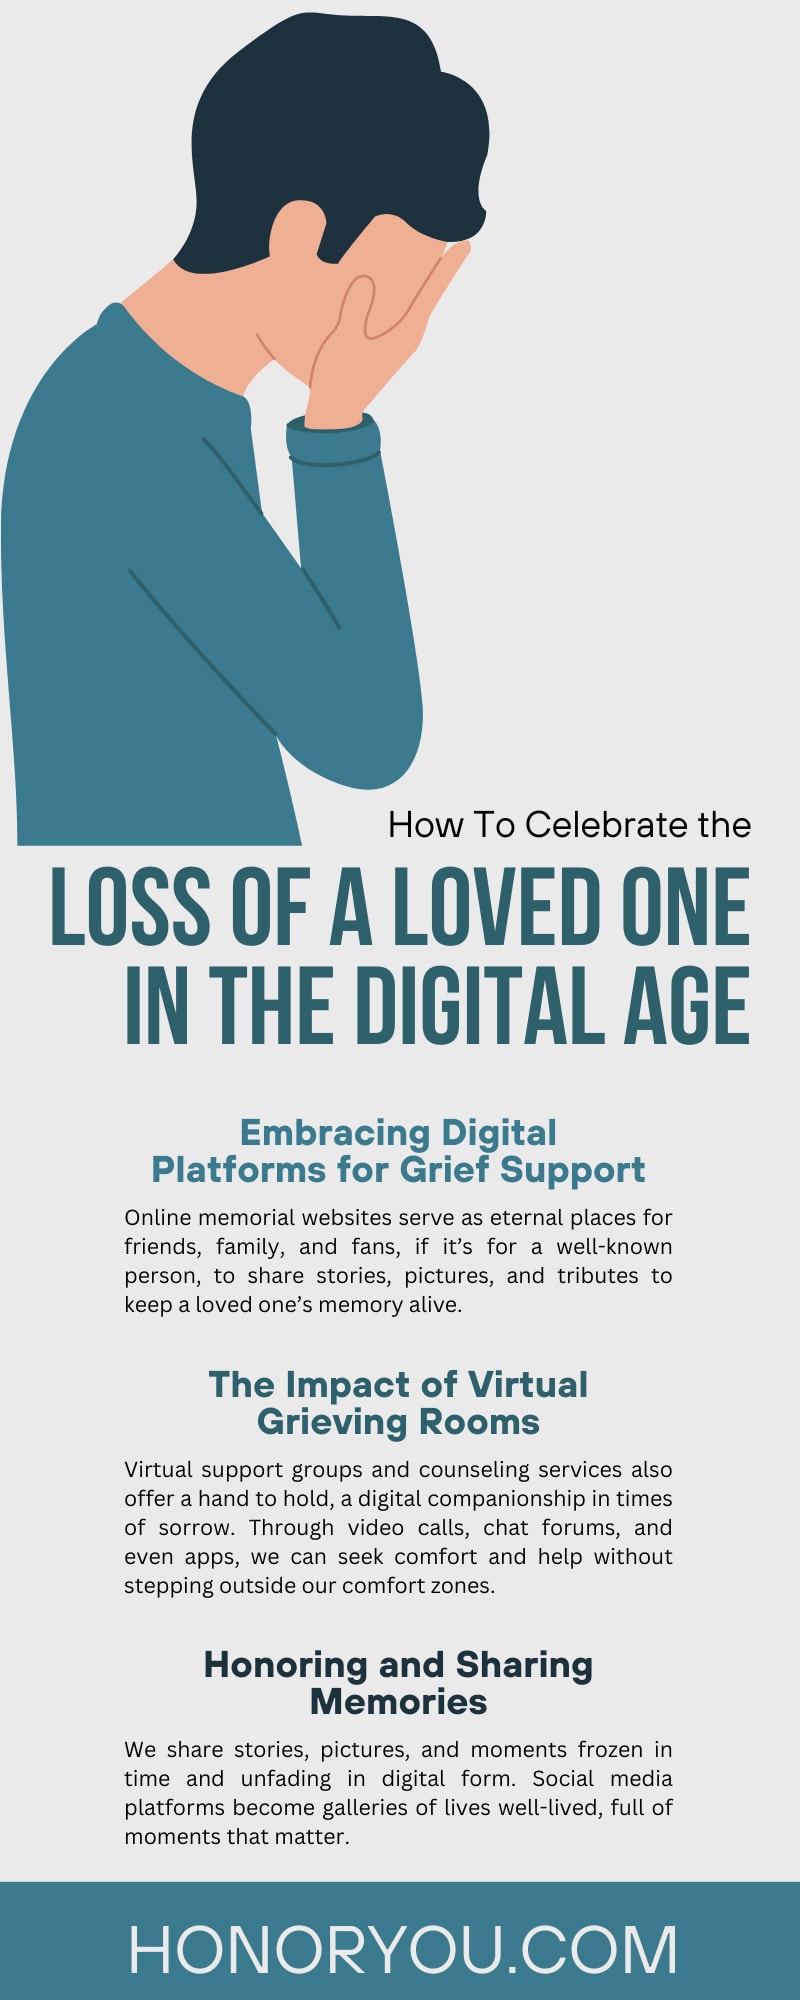 How To Celebrate the Loss of a Loved One in the Digital Age
